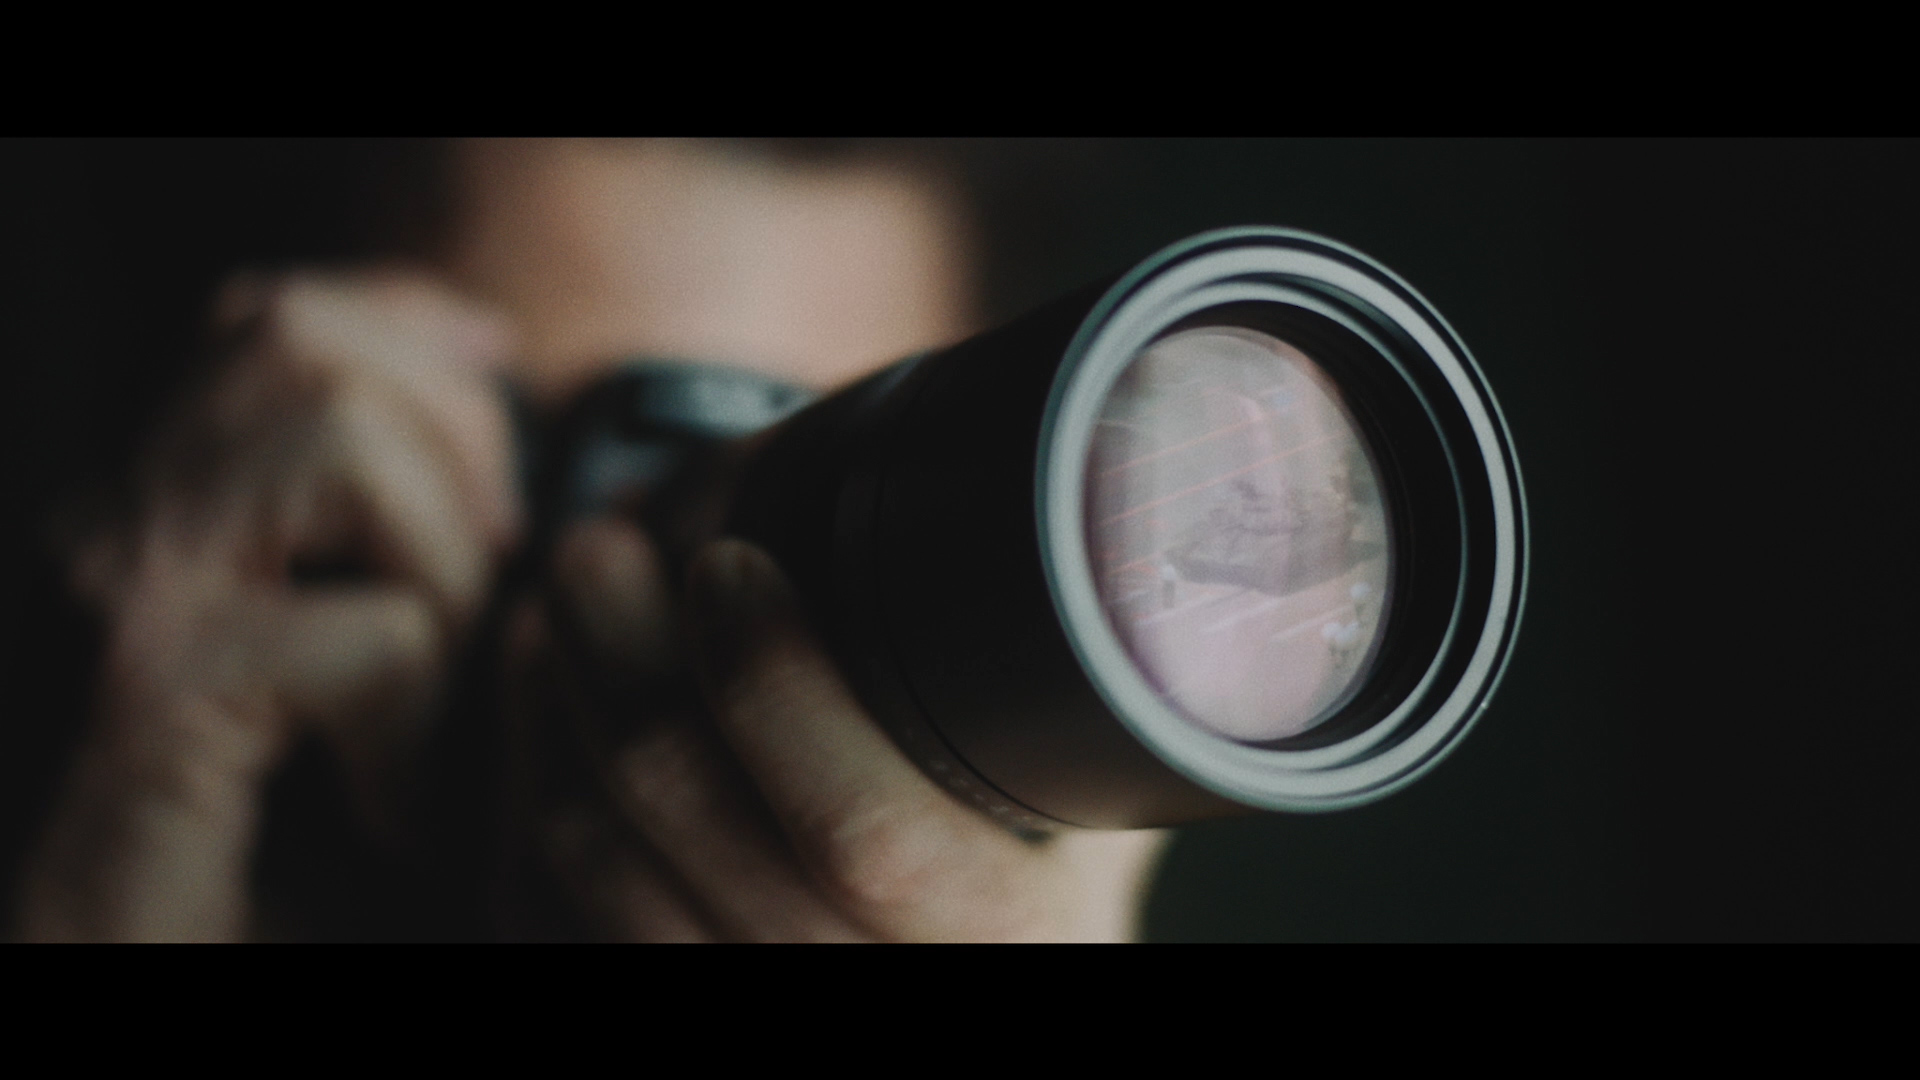 New short film from F/Nazca Saatchi & Saatchi: “Leica – The Hunt” – Leica Rumors